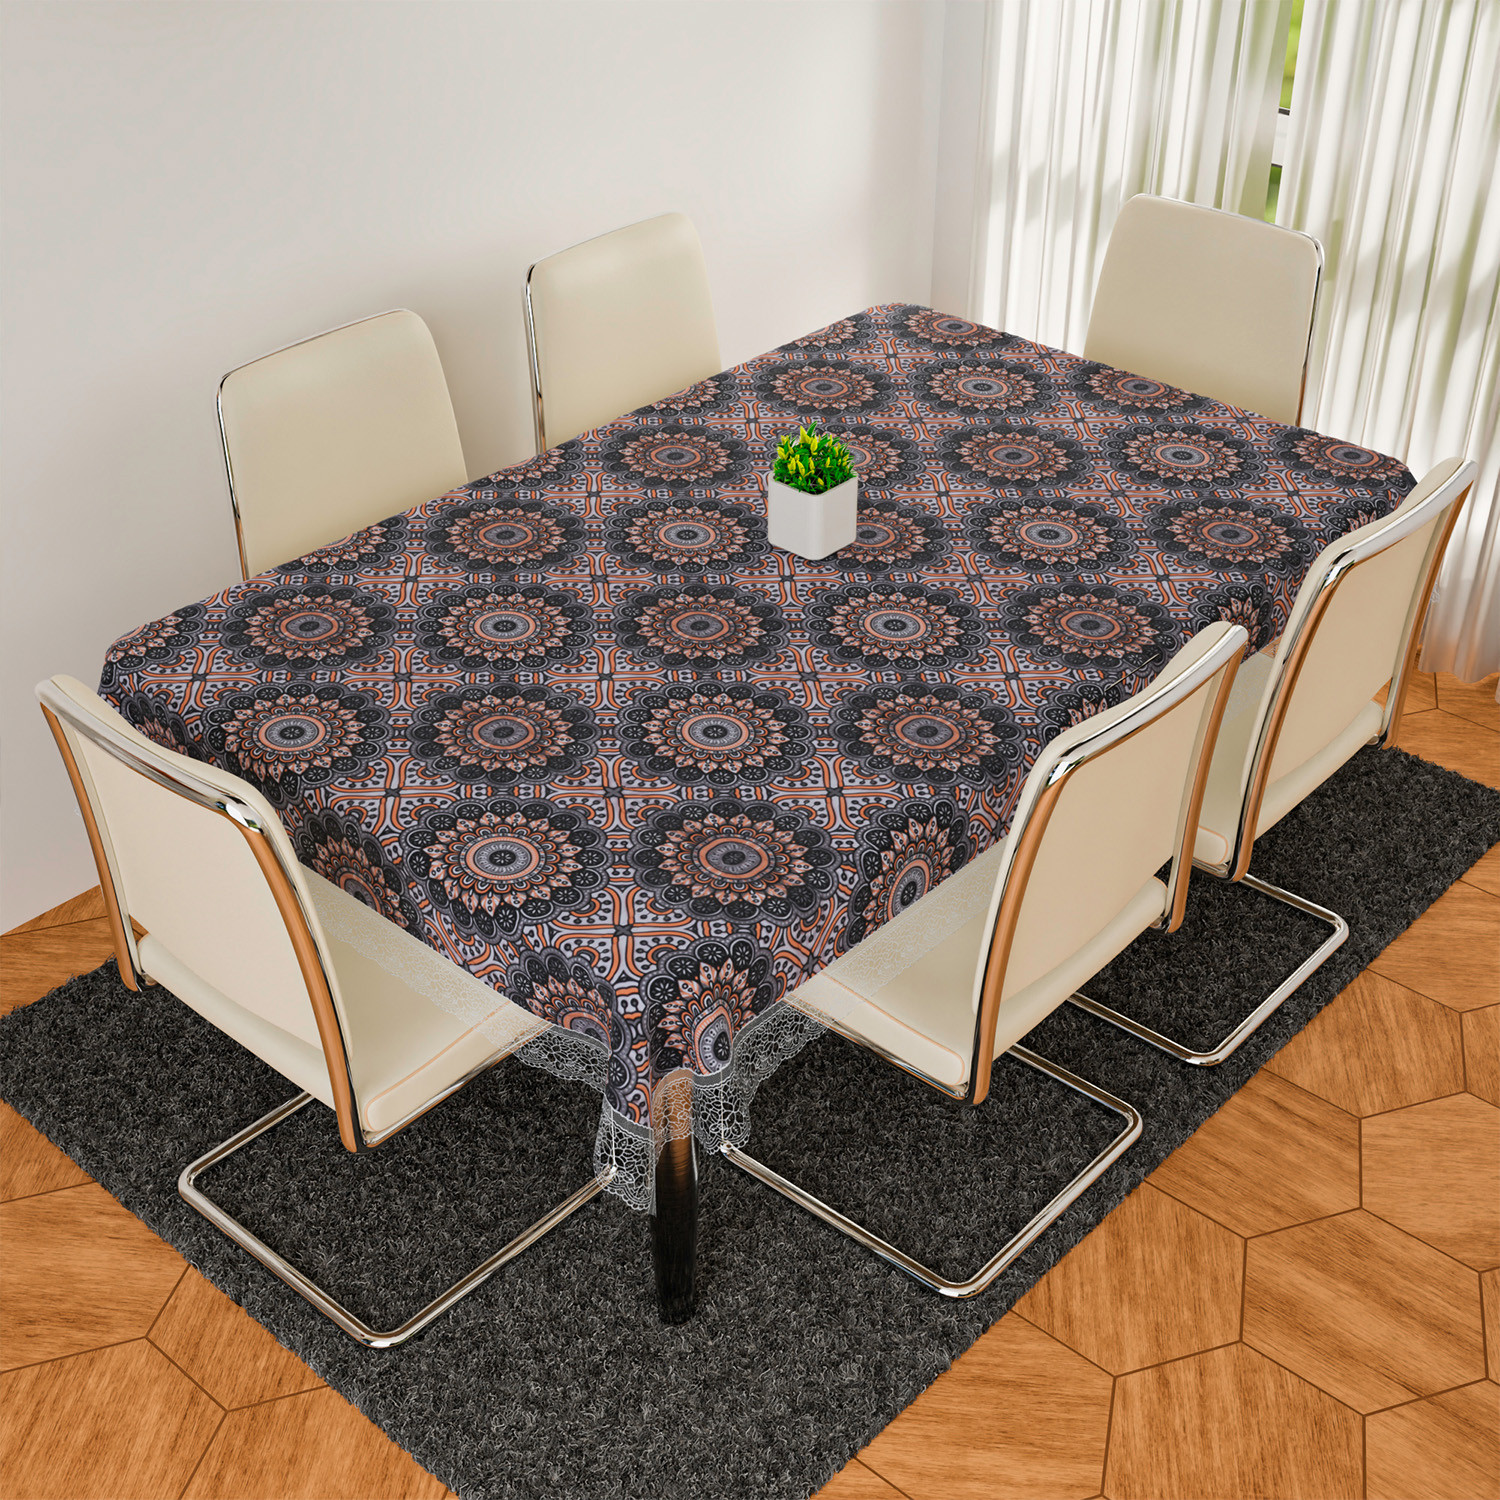 Kuber Industries Dining Table Cover | PVC Table Cloth Cover | 6 Seater Table Cloth | Rangoli Table Cover | Table Protector | Table Cover for Dining Table | 60x90 Inch | DTC | Black